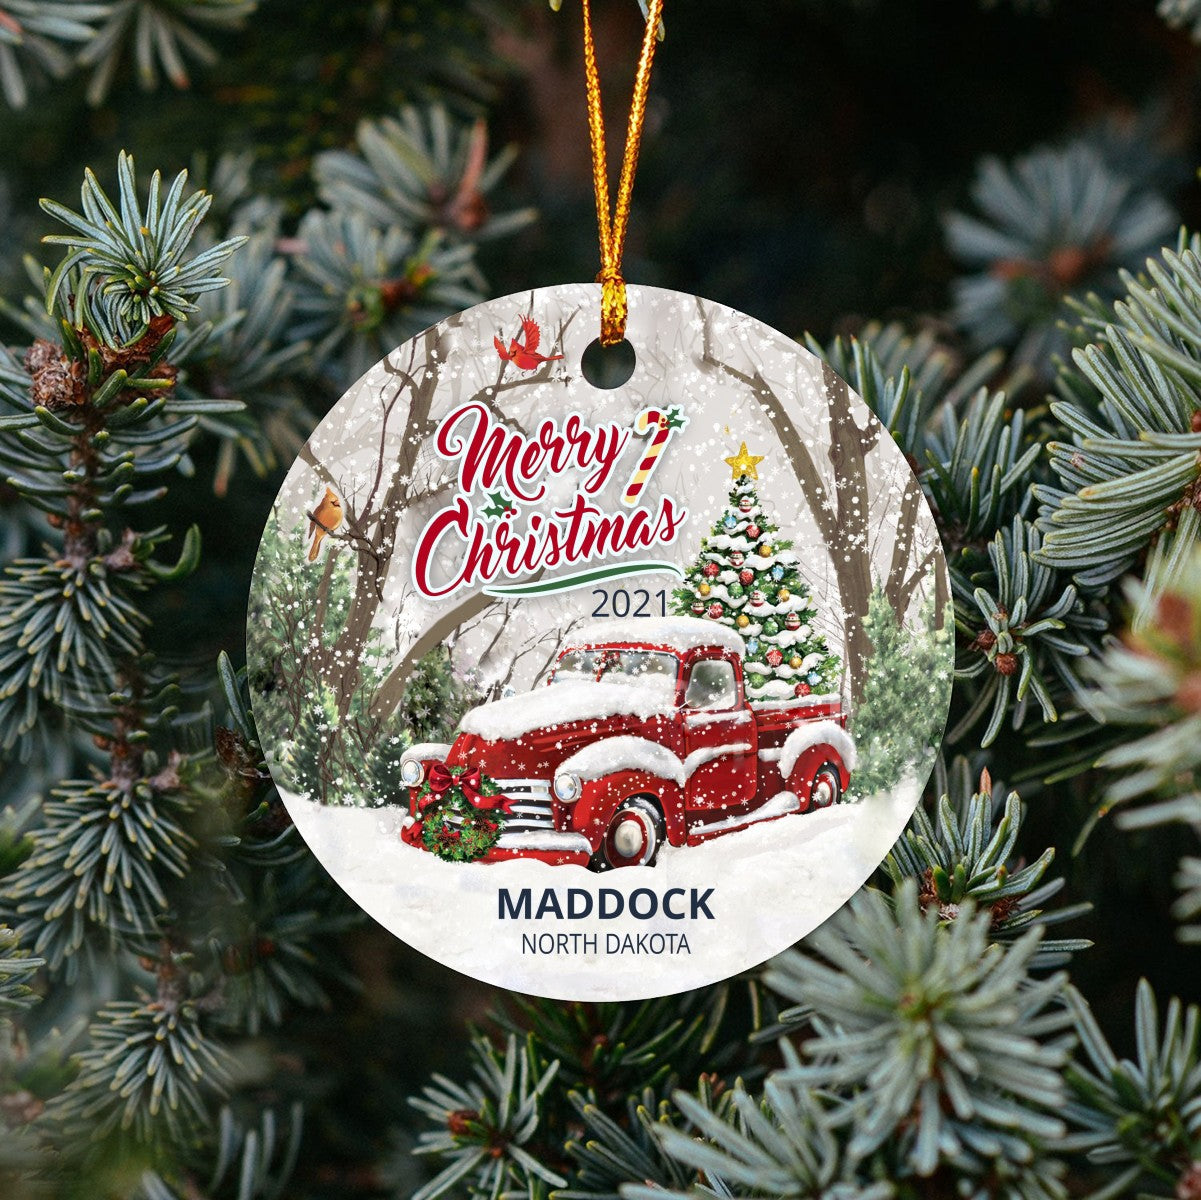 Christmas Tree Ornaments Maddock - Ornament With Name City, State Maddock North Dakota ND Ornament - Red Truck Xmas Ornaments 3'' Plastic Gift For Family, Friend And Housewarming